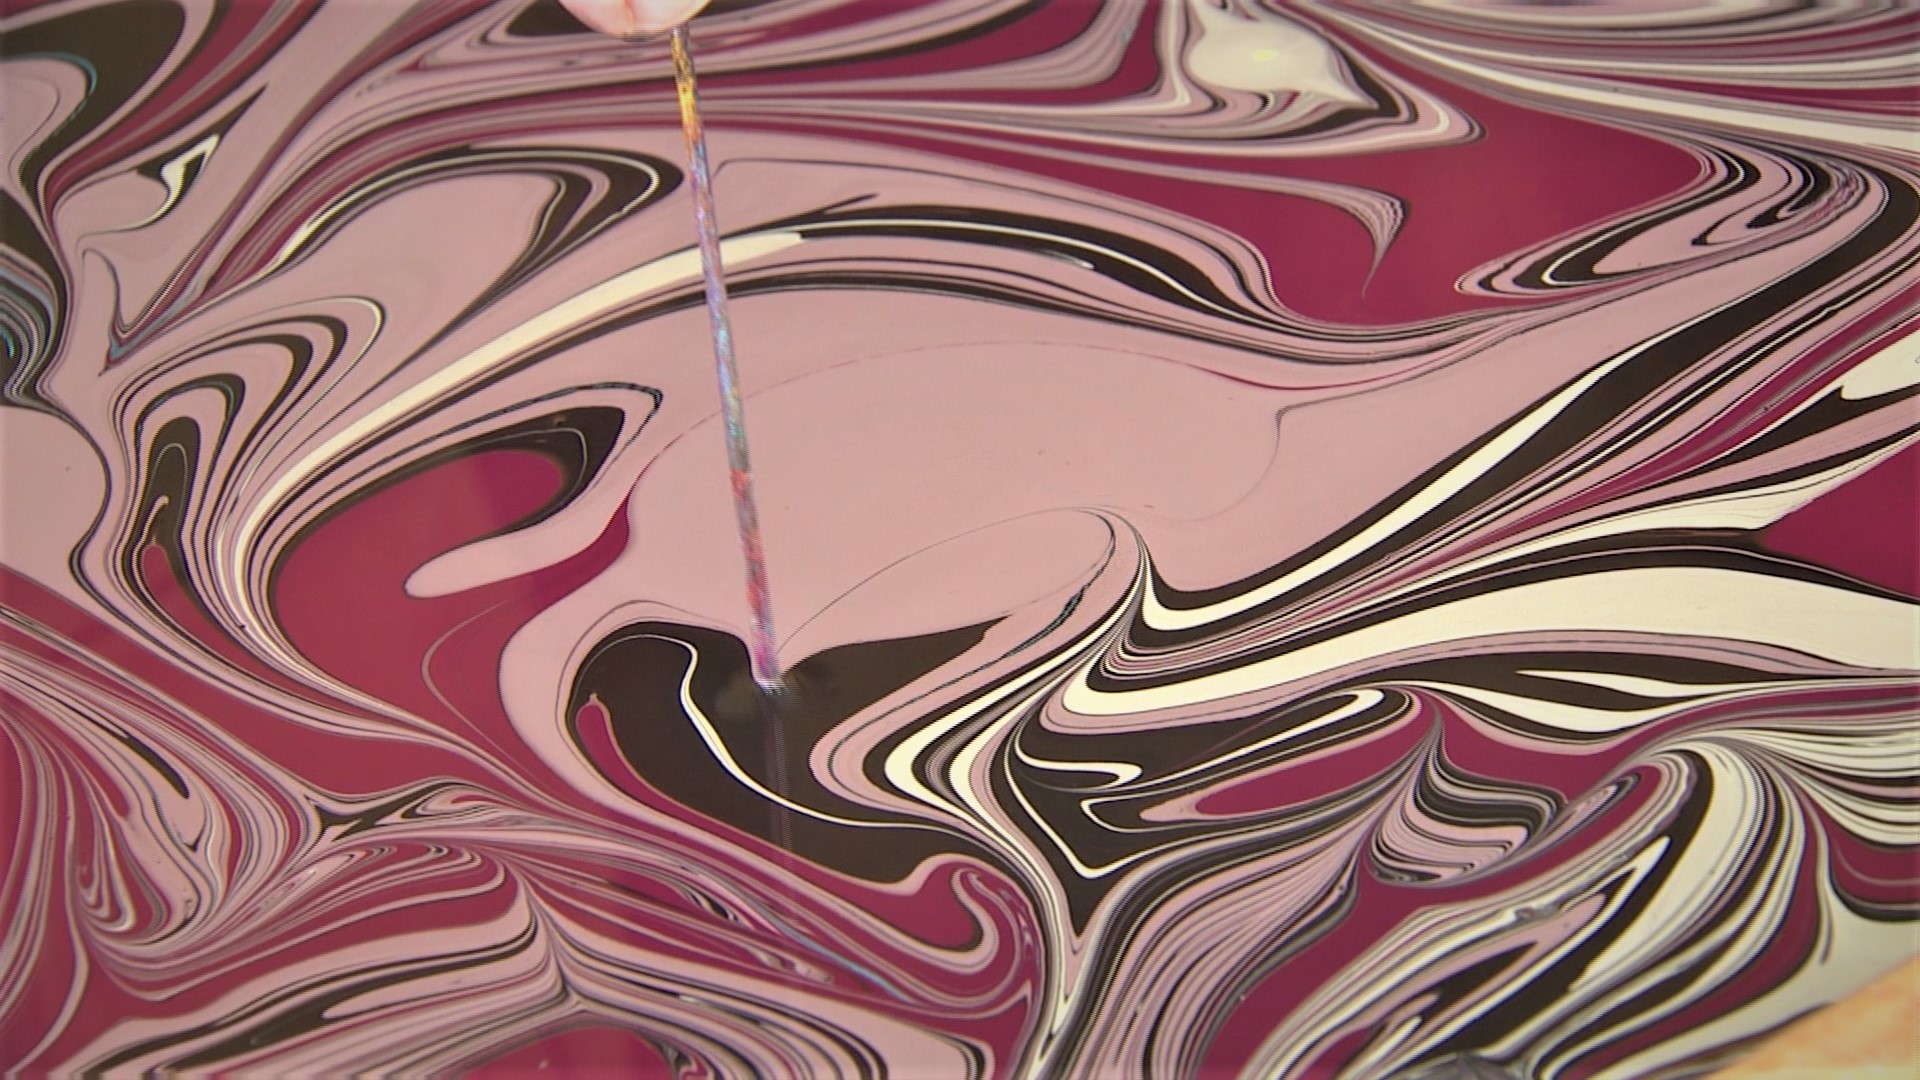 Visit the only shop in the Pacific Northwest offering water marbling art sessions